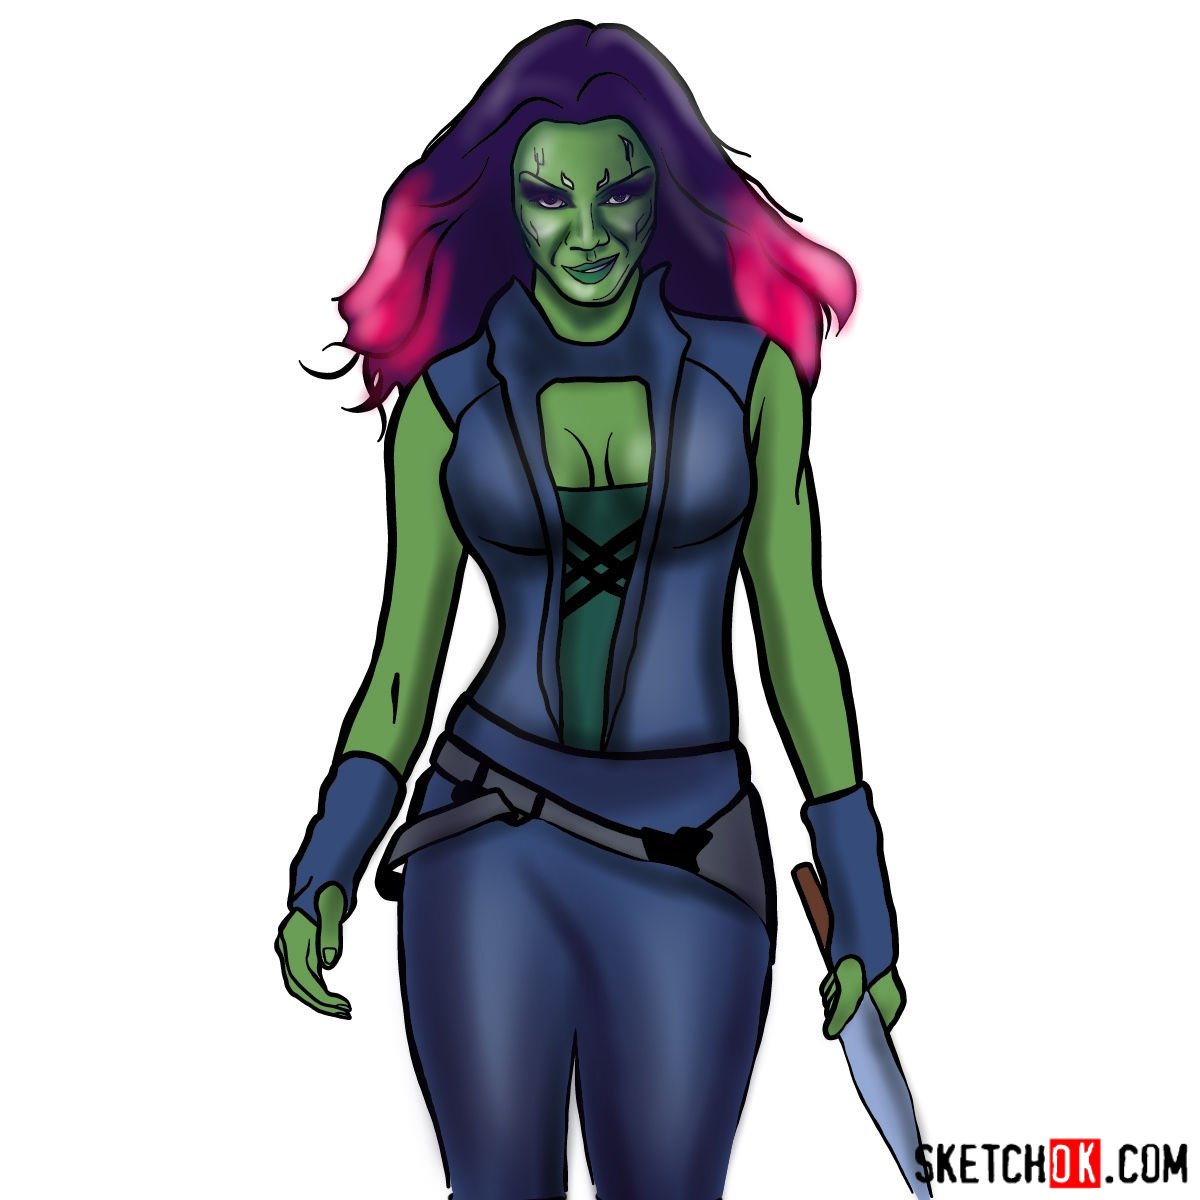 How to draw Gamora from Guardians of the Galaxy - Sketchok easy drawing gui...